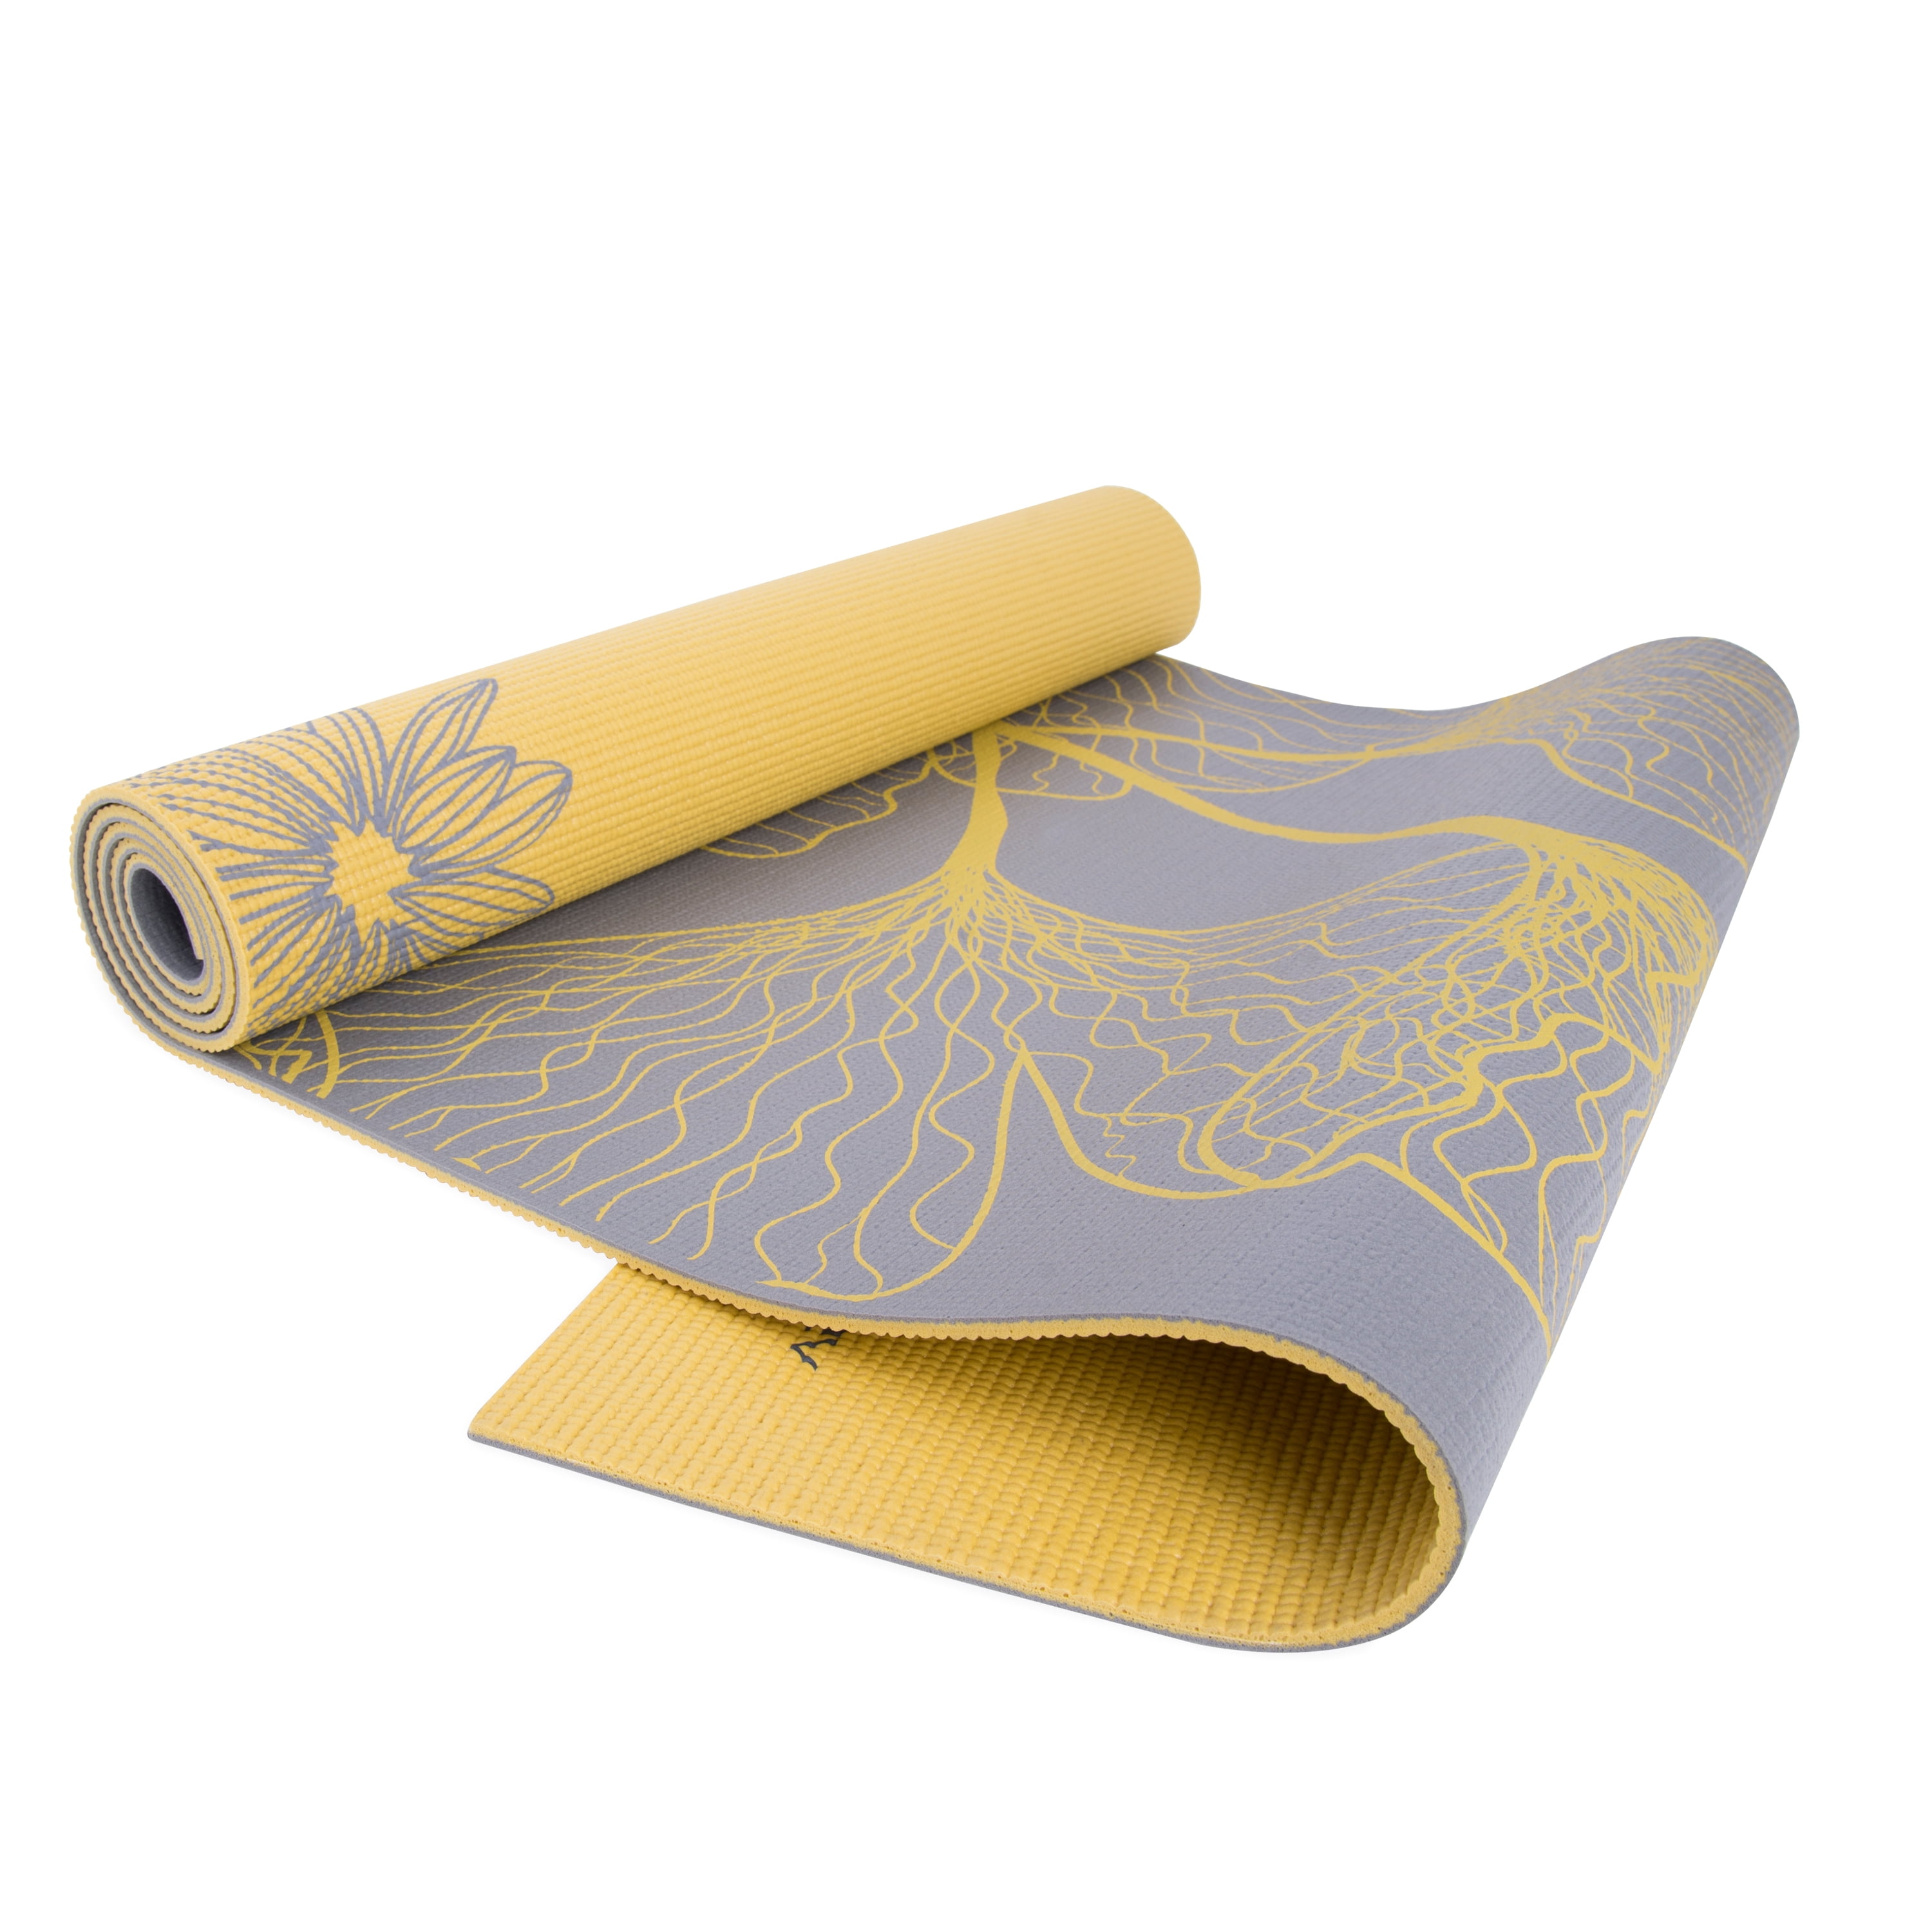 Secret Garden Blossom Yoga Mat – Exercise Mat for Beginners and Advanced – 5mm Thick Yoga Mat for Cushioning and Support – Double-Layered Yoga Mat